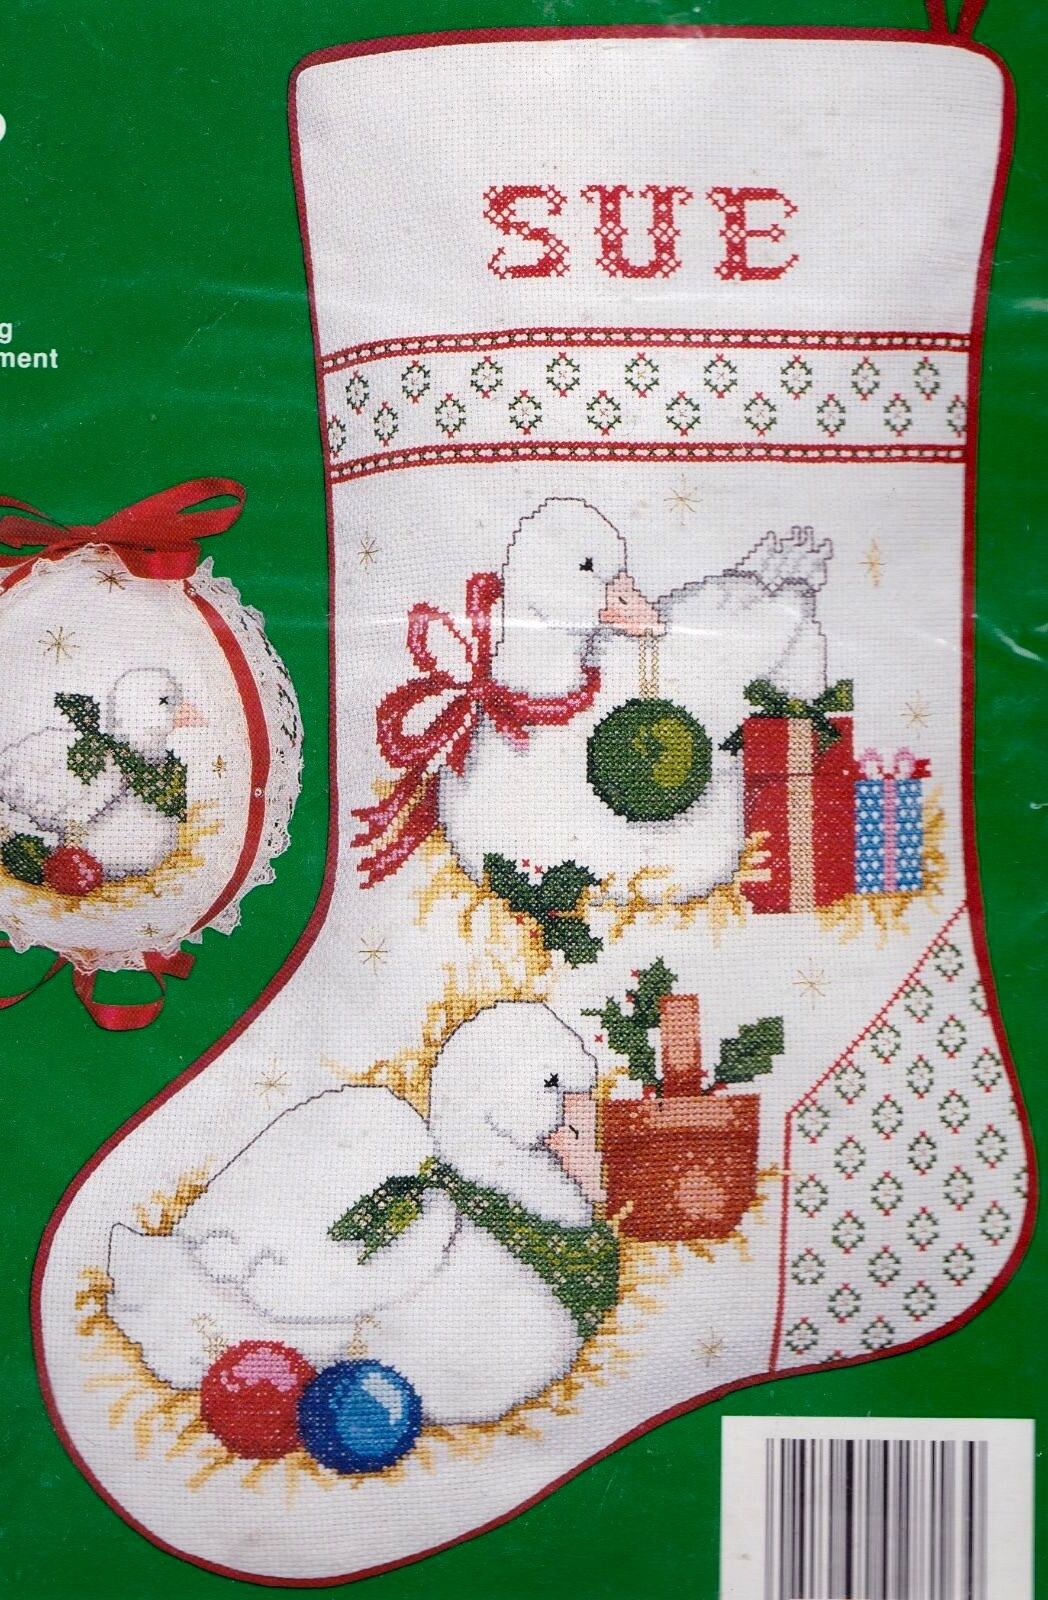 DIY Needle Treasures Geese a Layin Goose Counted Cross Stitch Stocking Kit 02816